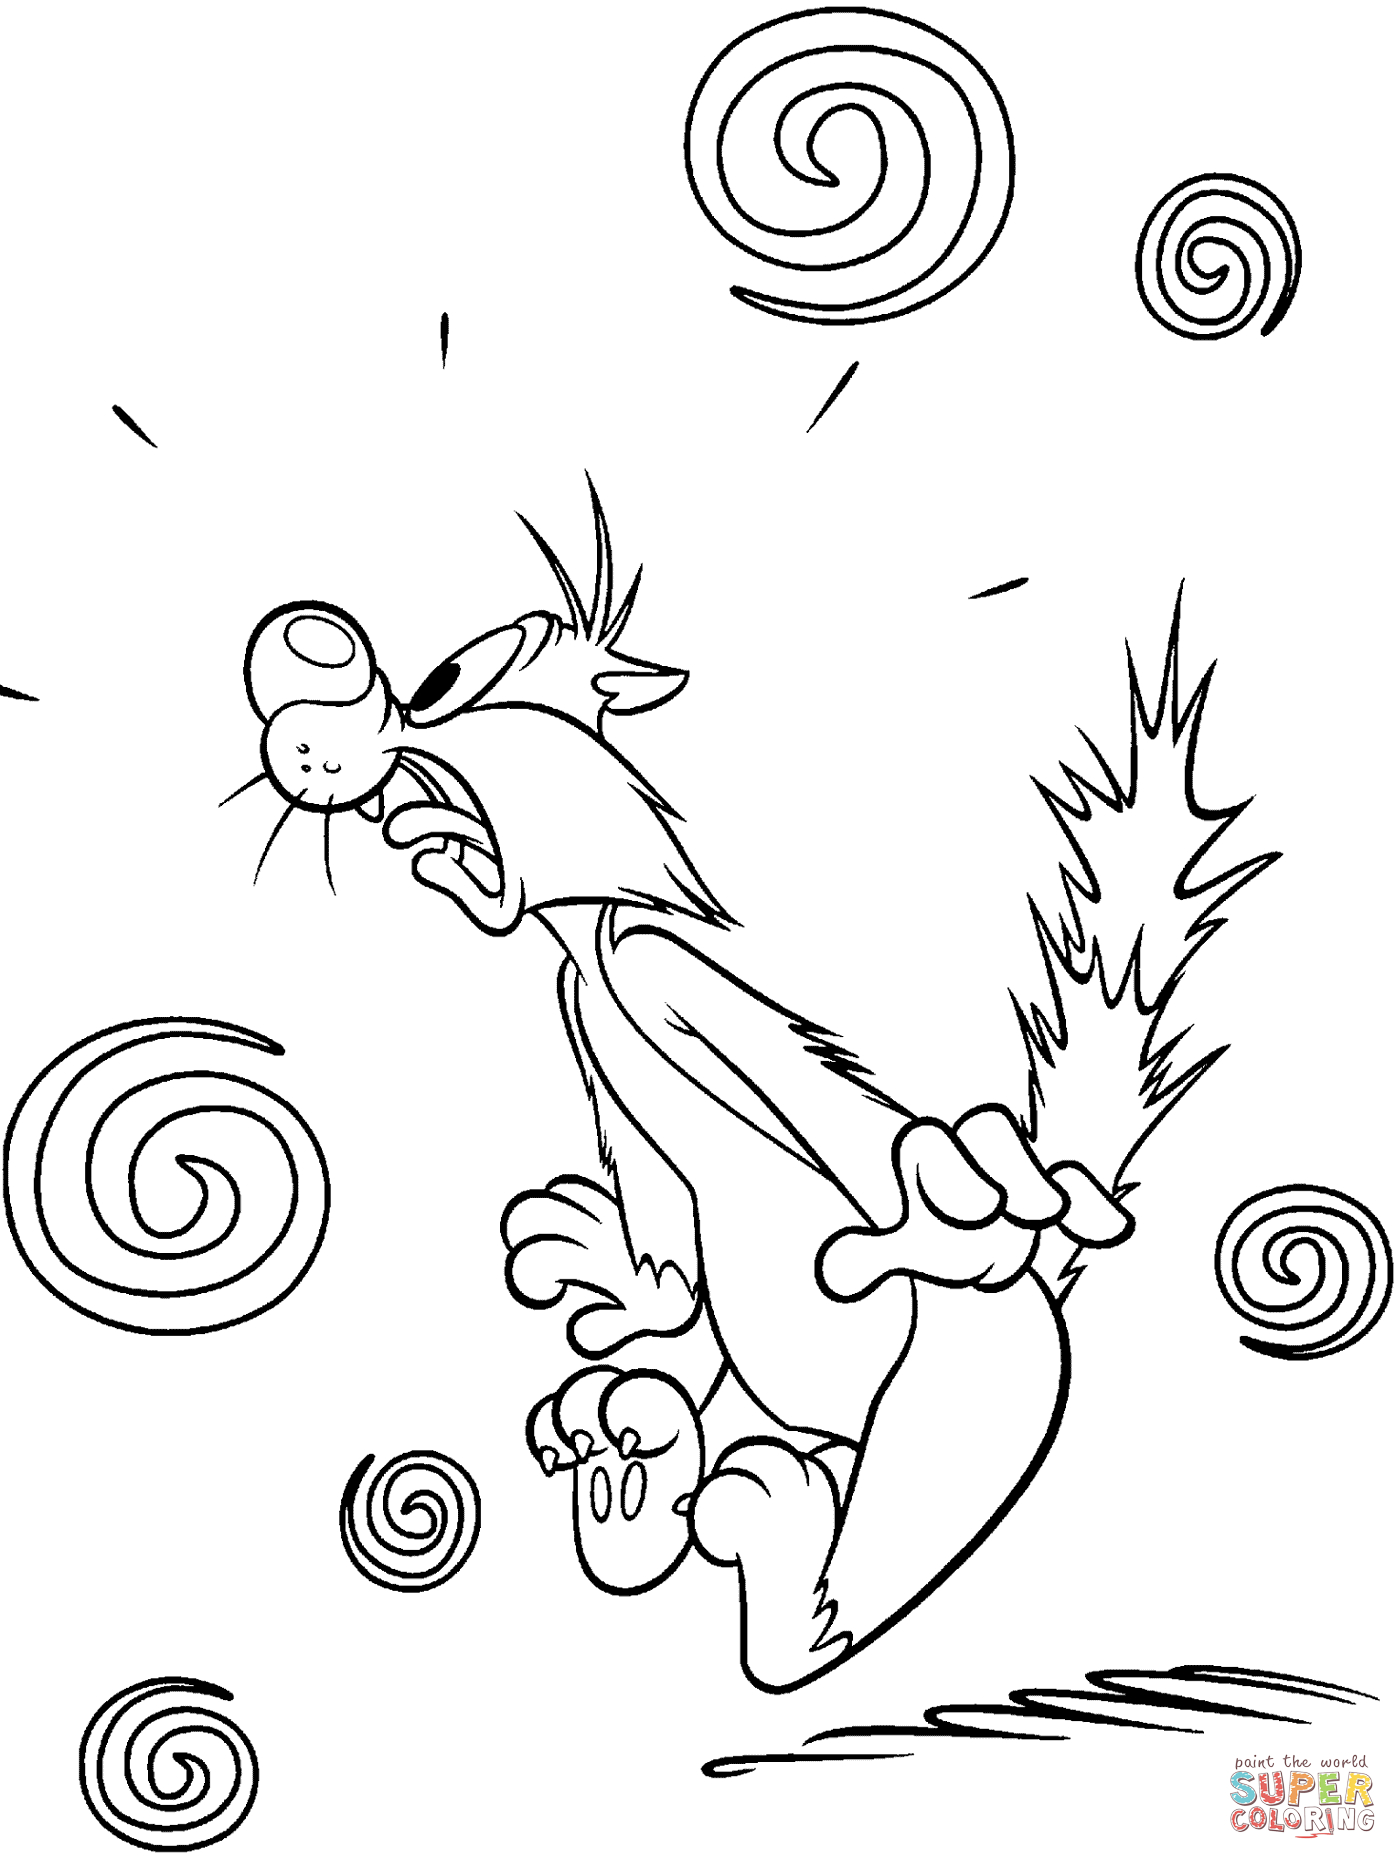 Elmer Fudd Coloring Pages Looney Tunes Elmer Fudd Coloring Page Free Printable Coloring